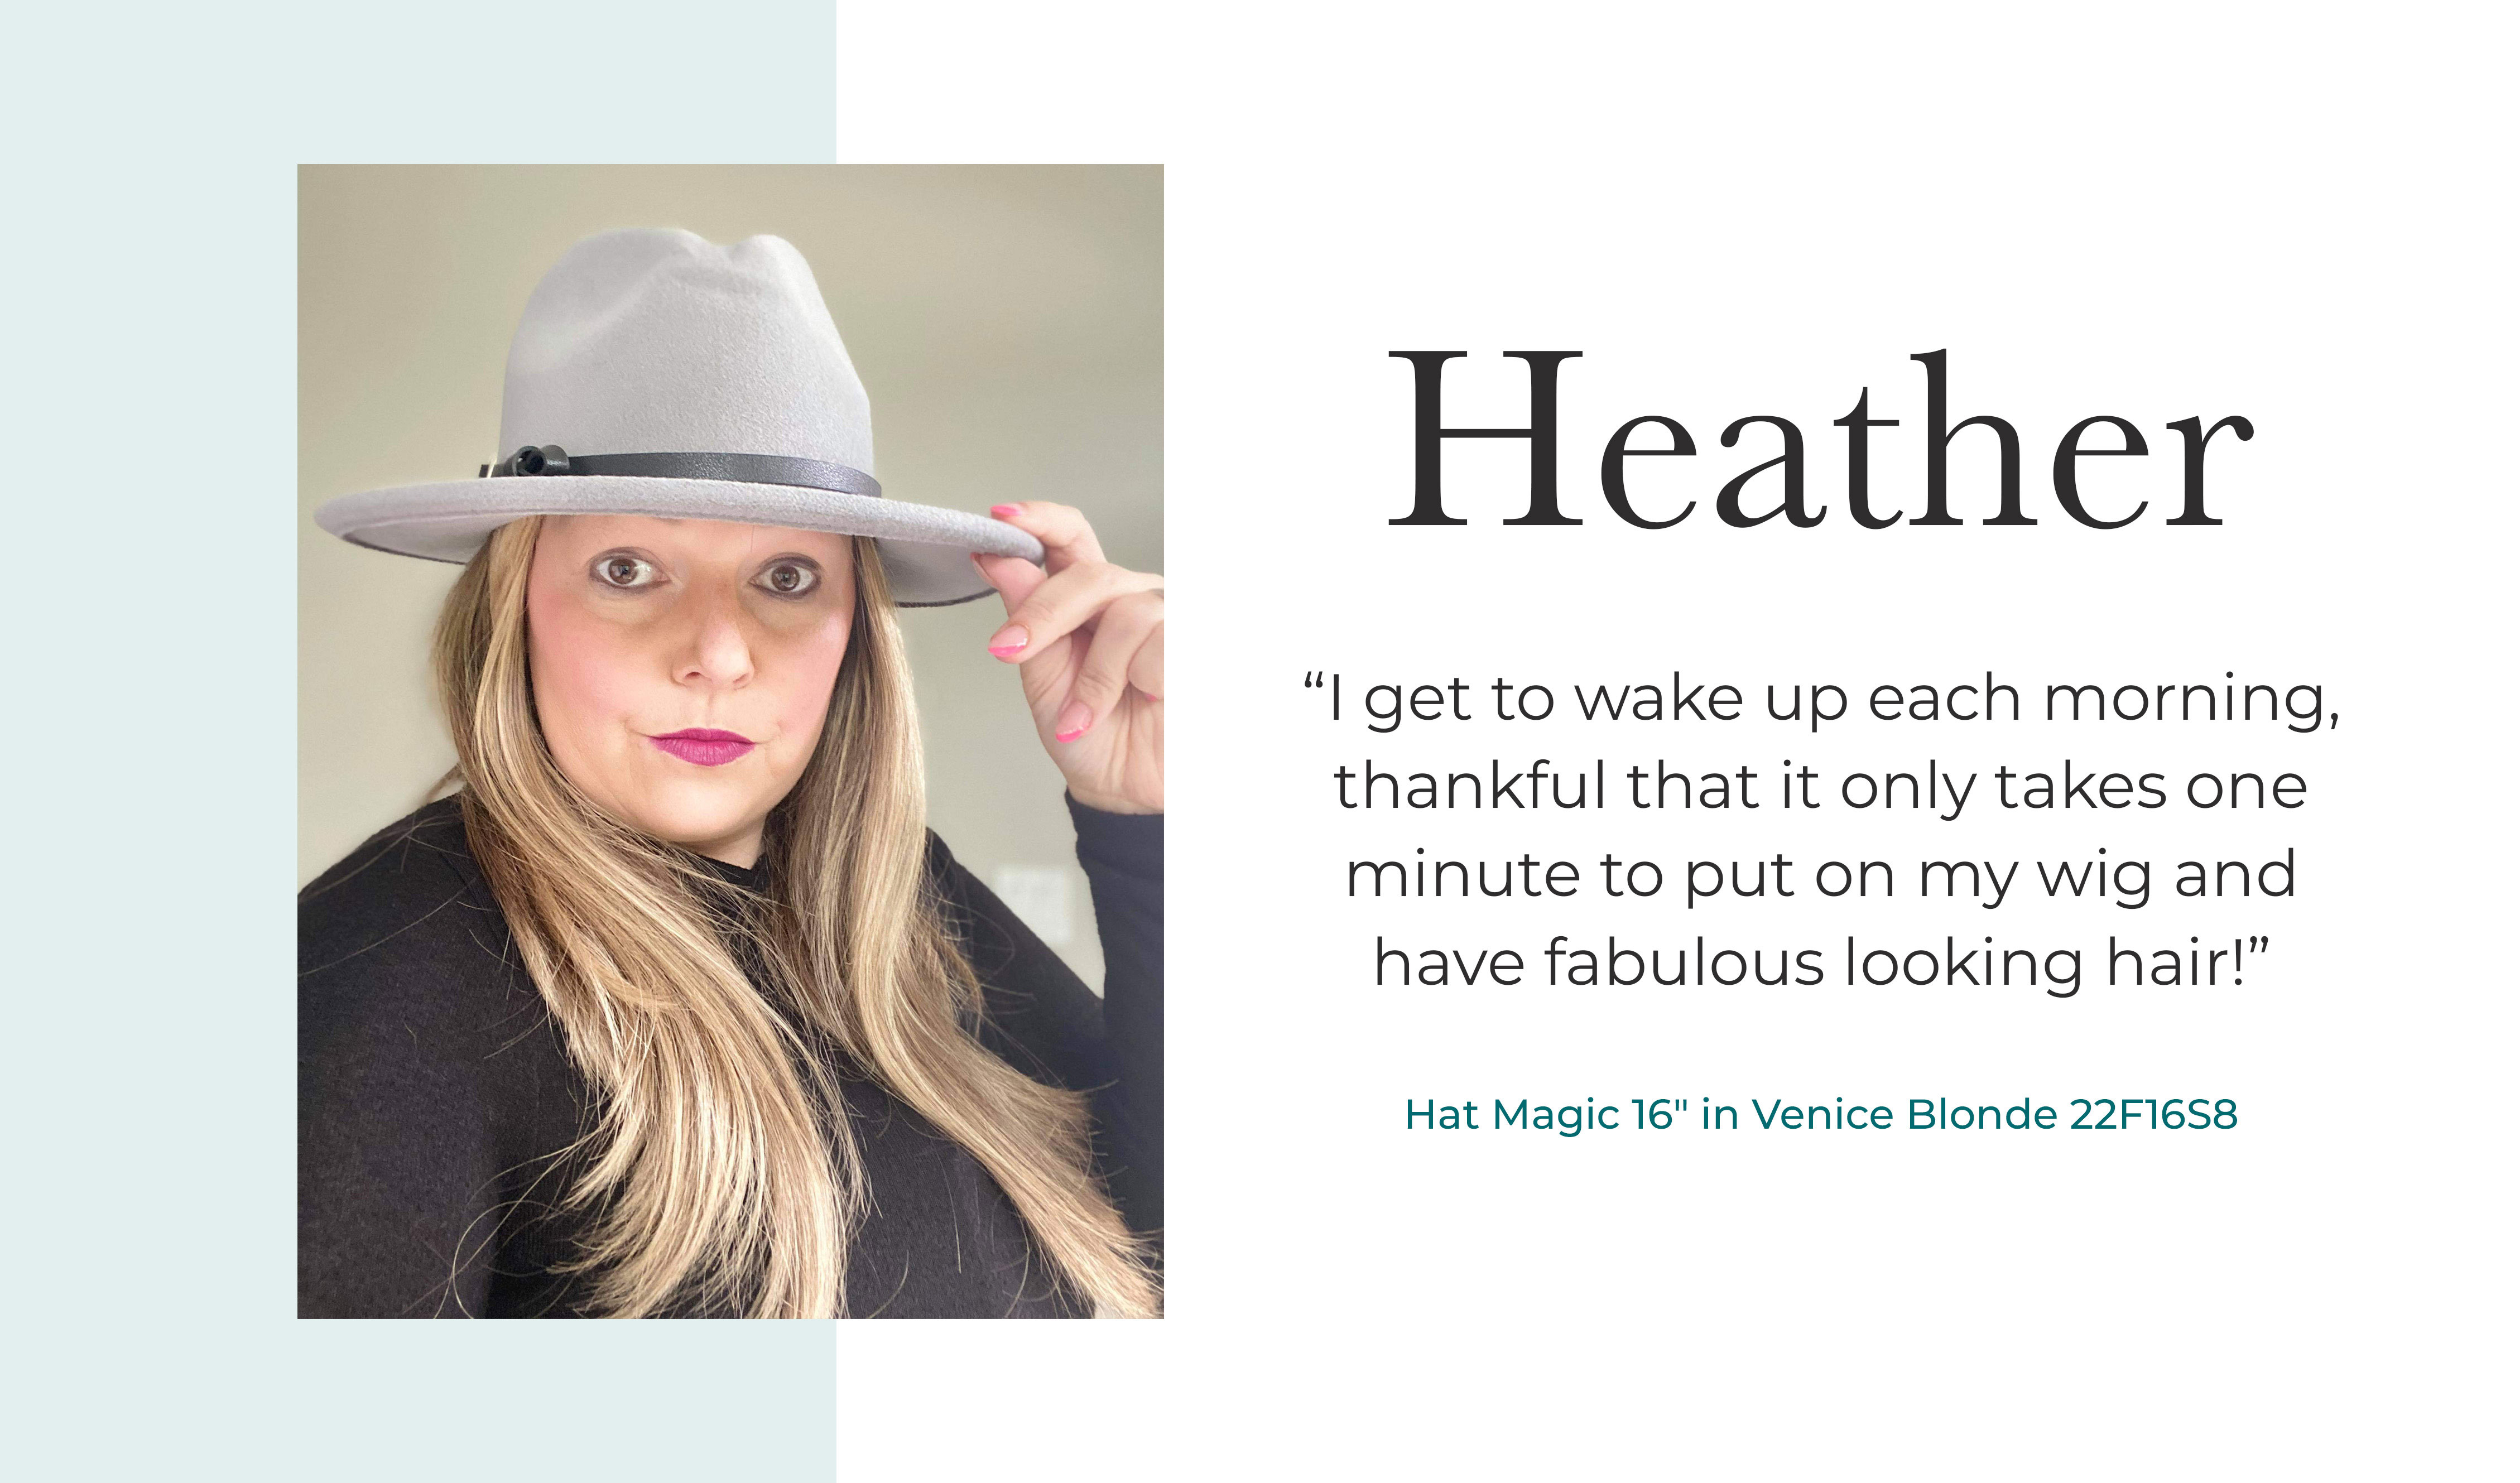 "I get to wake up each morning, thankful that it only takes 1 minute to put on my wig and have fabulous looking hair!" - Heather, Pretty Wigs To You